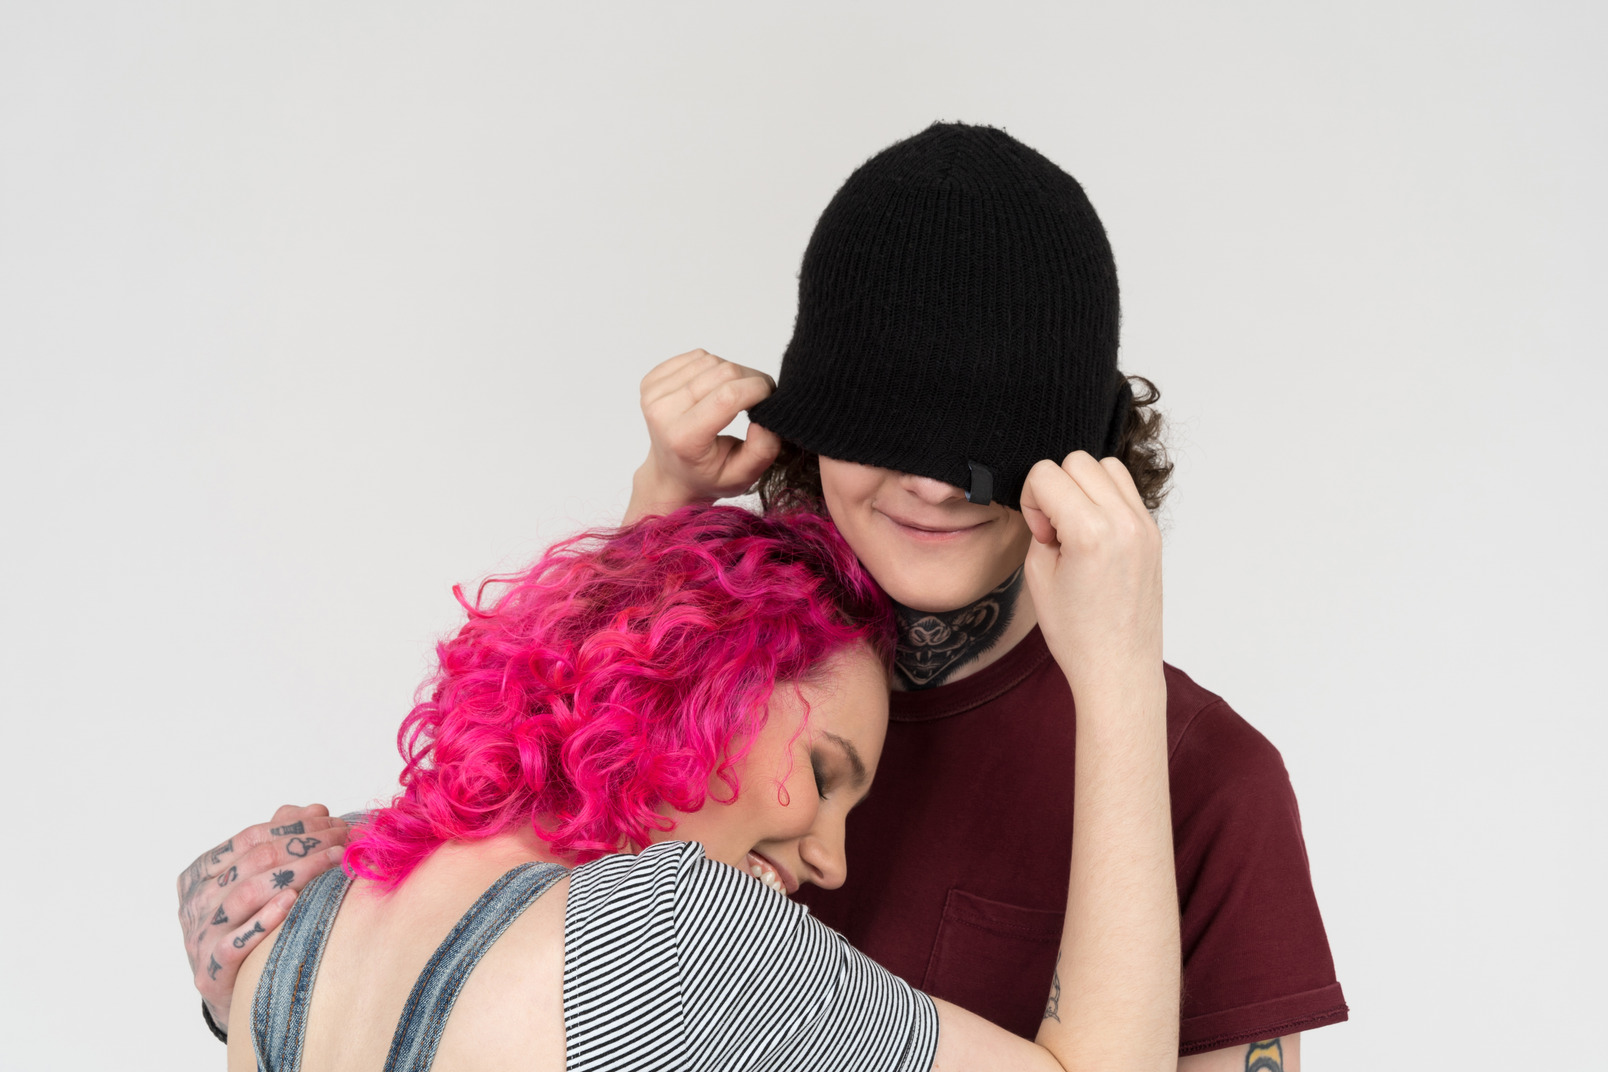 Smiling pink-haired girl puts hat oh her boyfriend